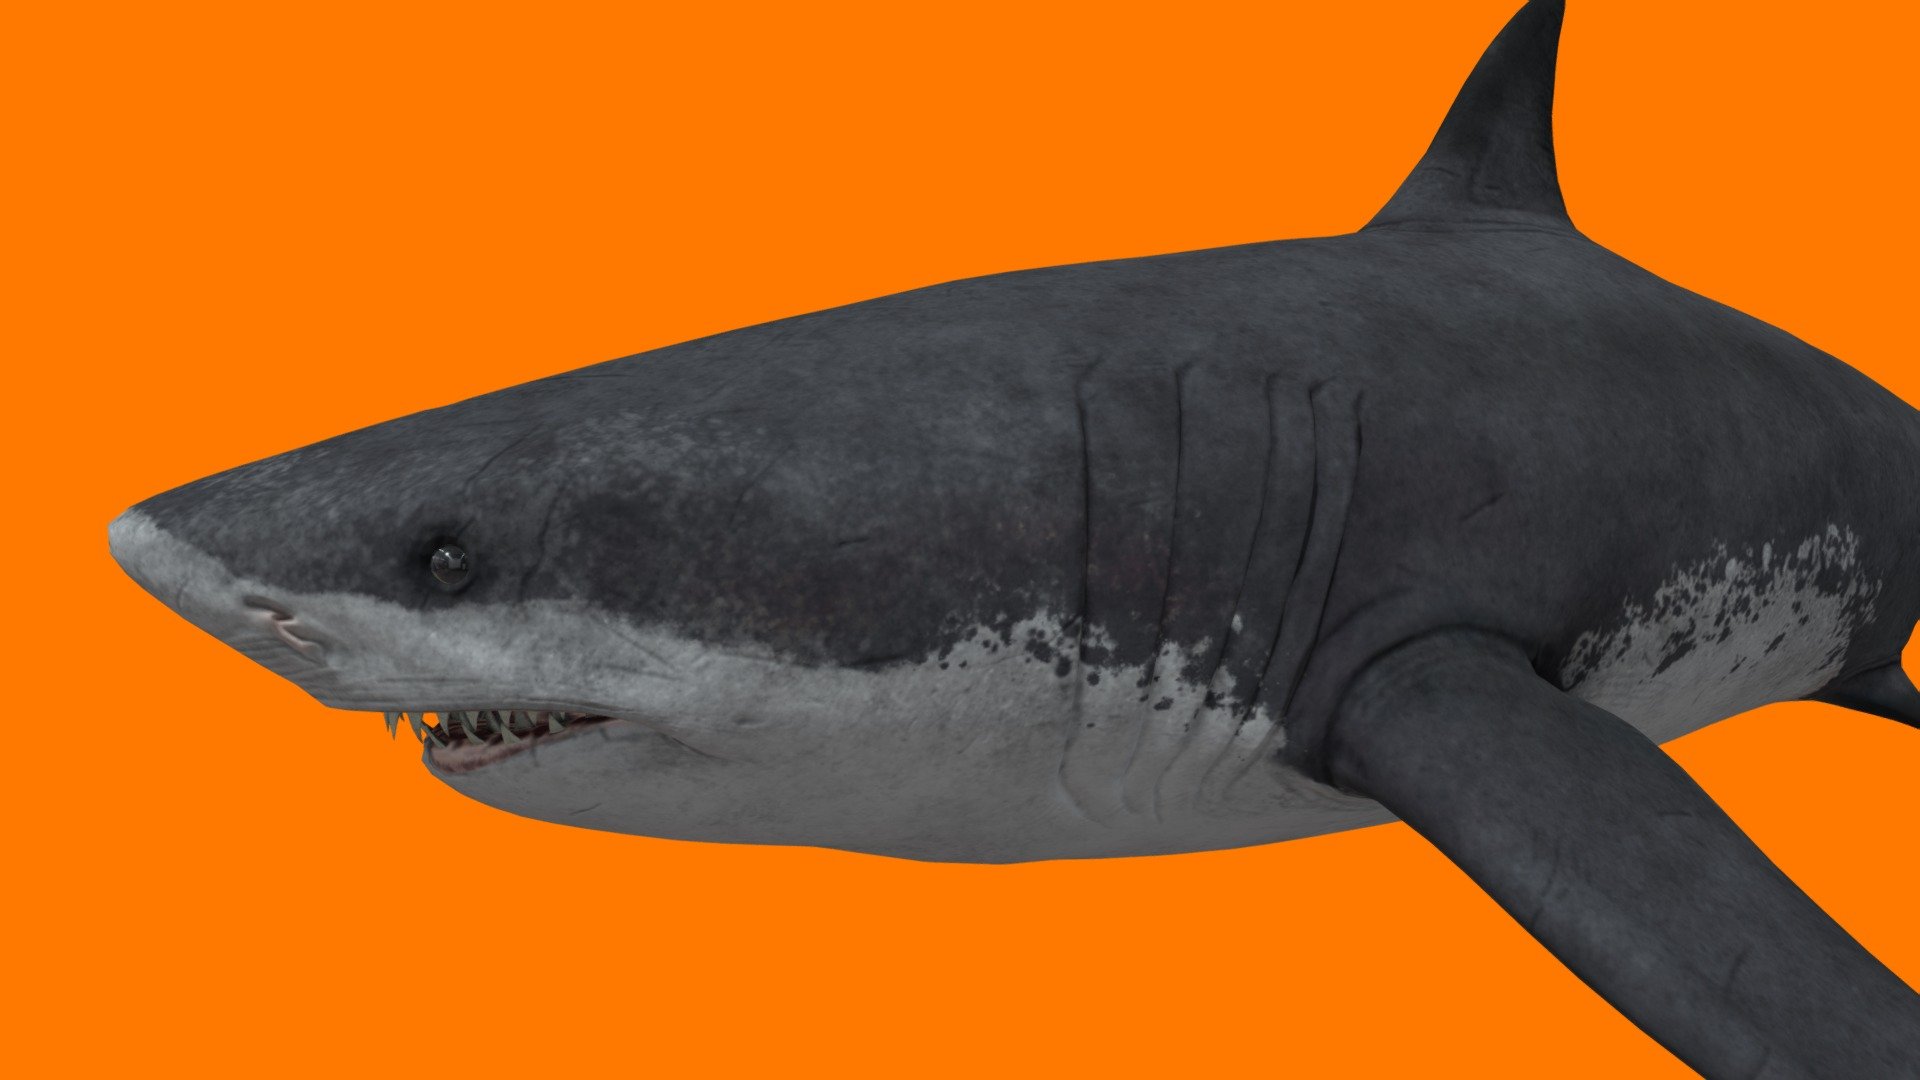 this shark is gigantic and it comes from the a movie called The Meg but this shark does not exist but the only shark that exists is the great white shark - megalodon - Download Free 3D model by dinomaster 3d model